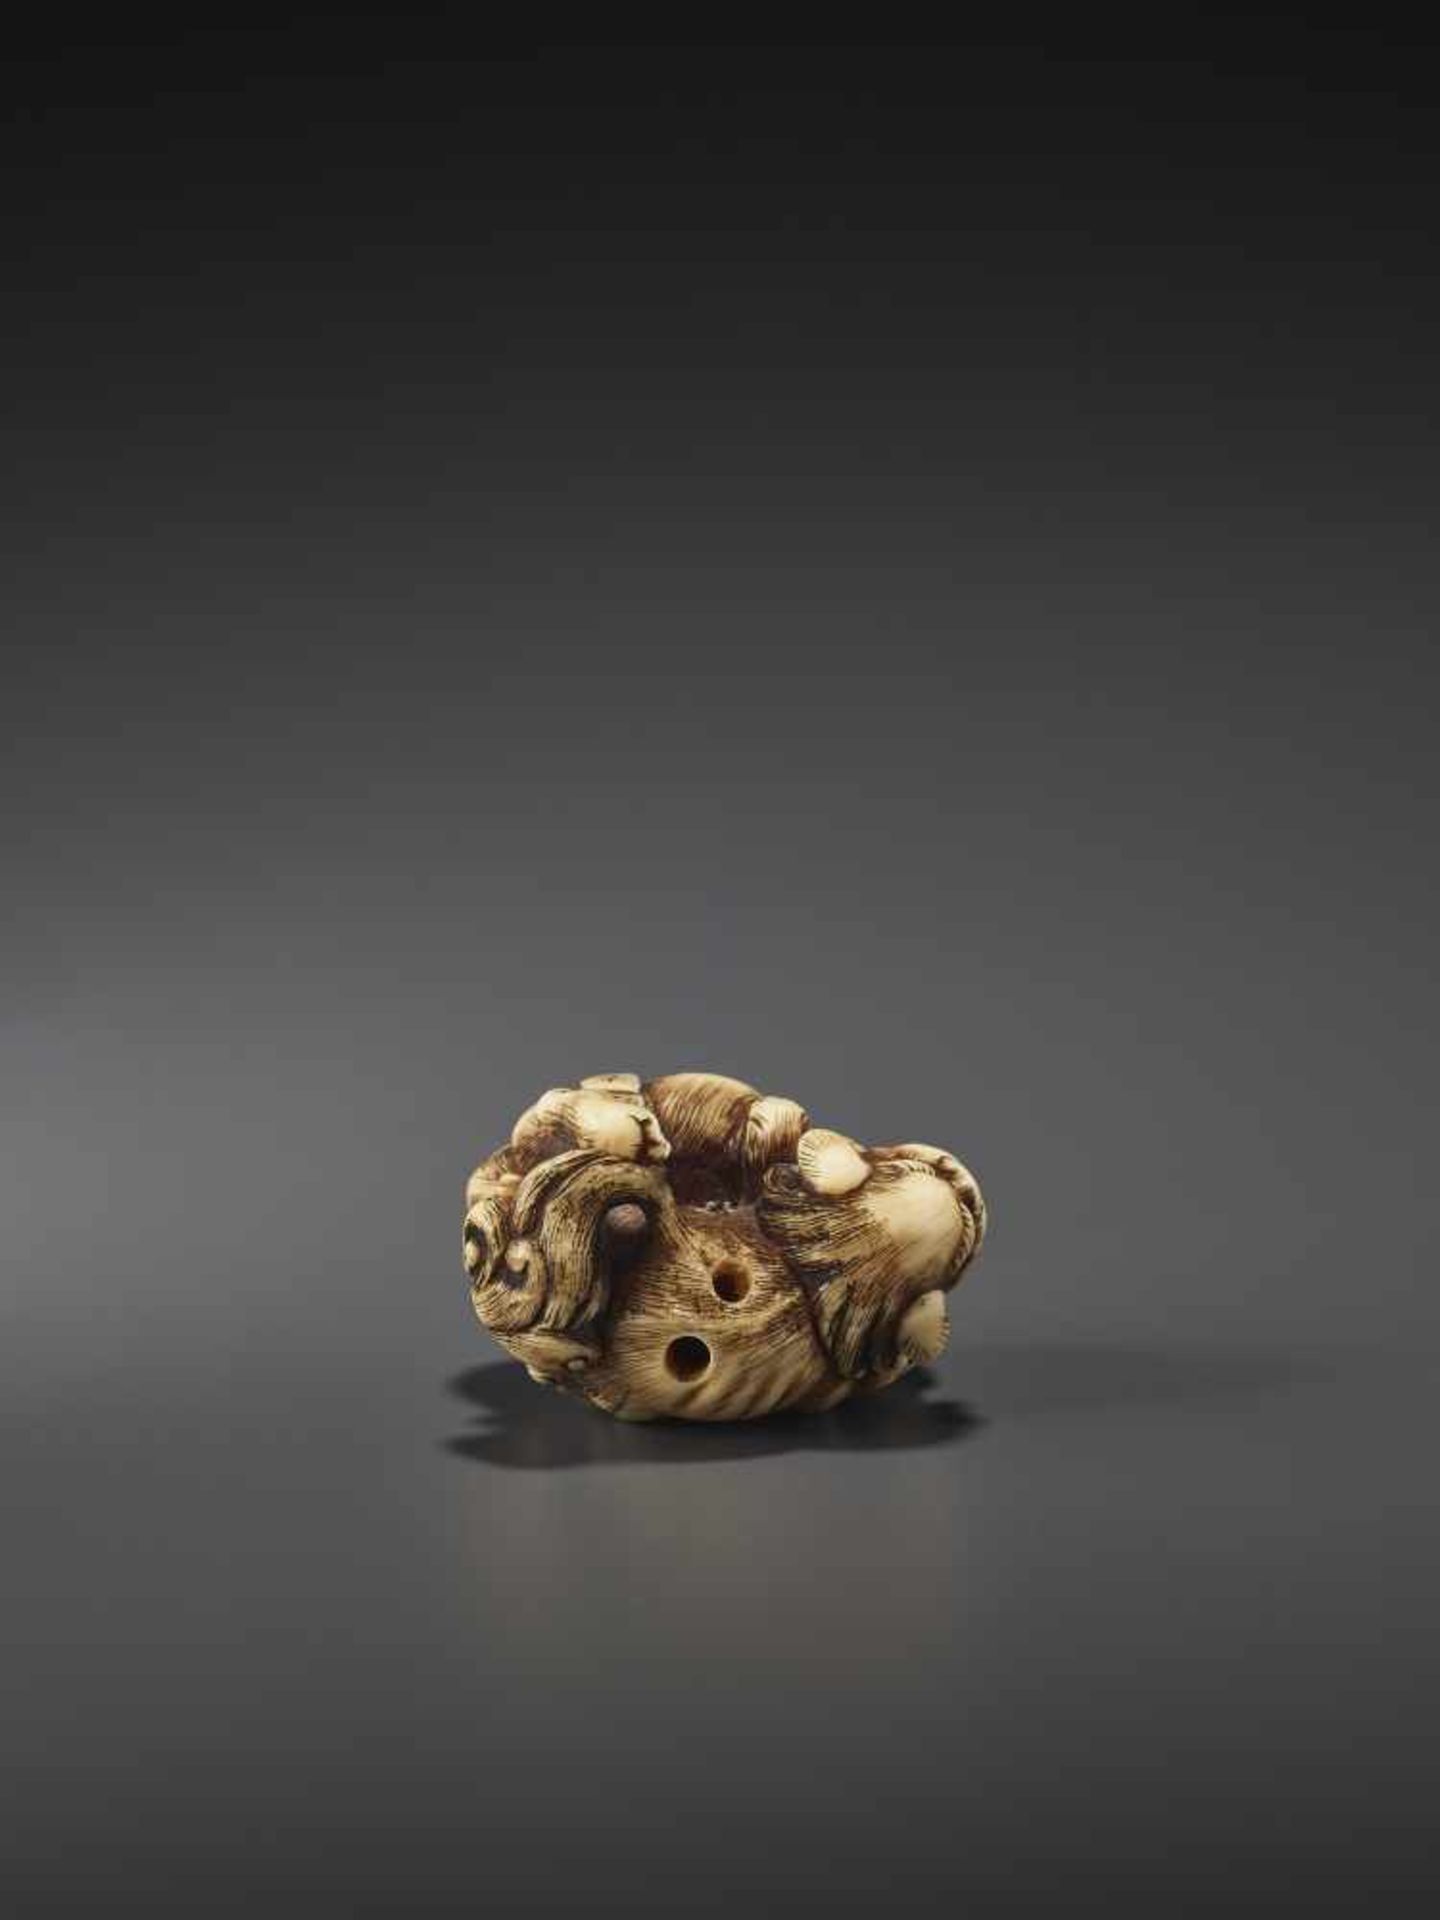 A FINE IVORY NETSUKE OF TWO FIGHTING SHISHI BY KINSHI By Kinshi, ivory netsukeJapan, 19th century, - Image 9 of 10